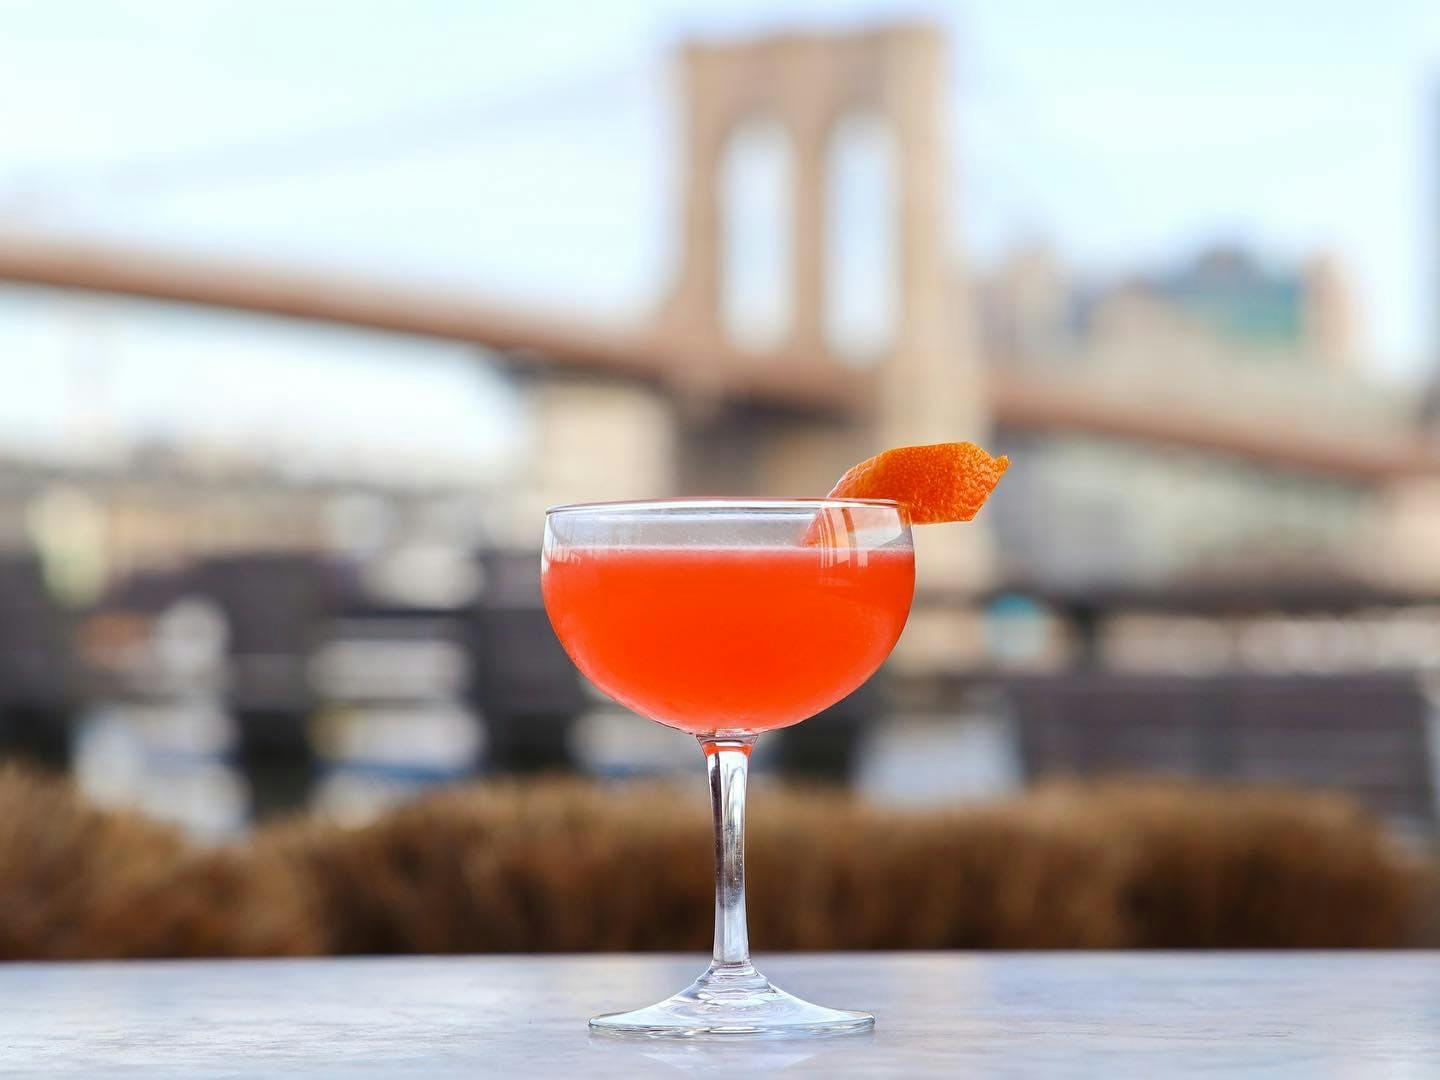 10 Rooftop Restaurants and Bars in NYC to Try This Summer